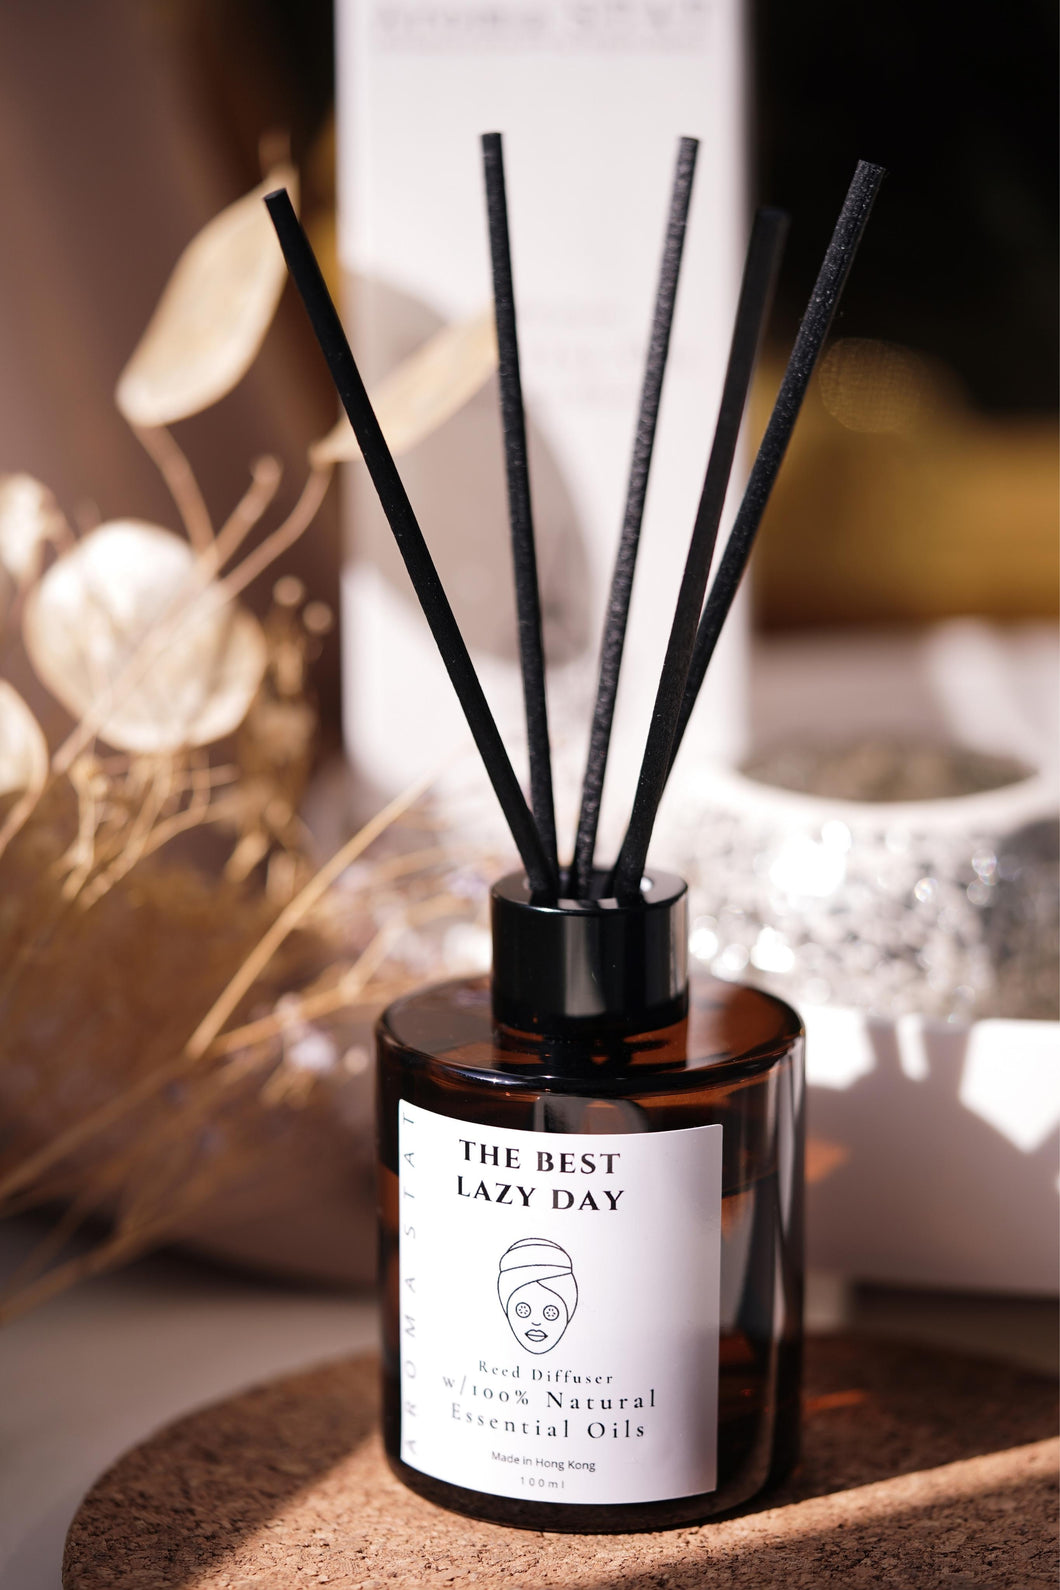 The Best Lazy Day- reed diffuser